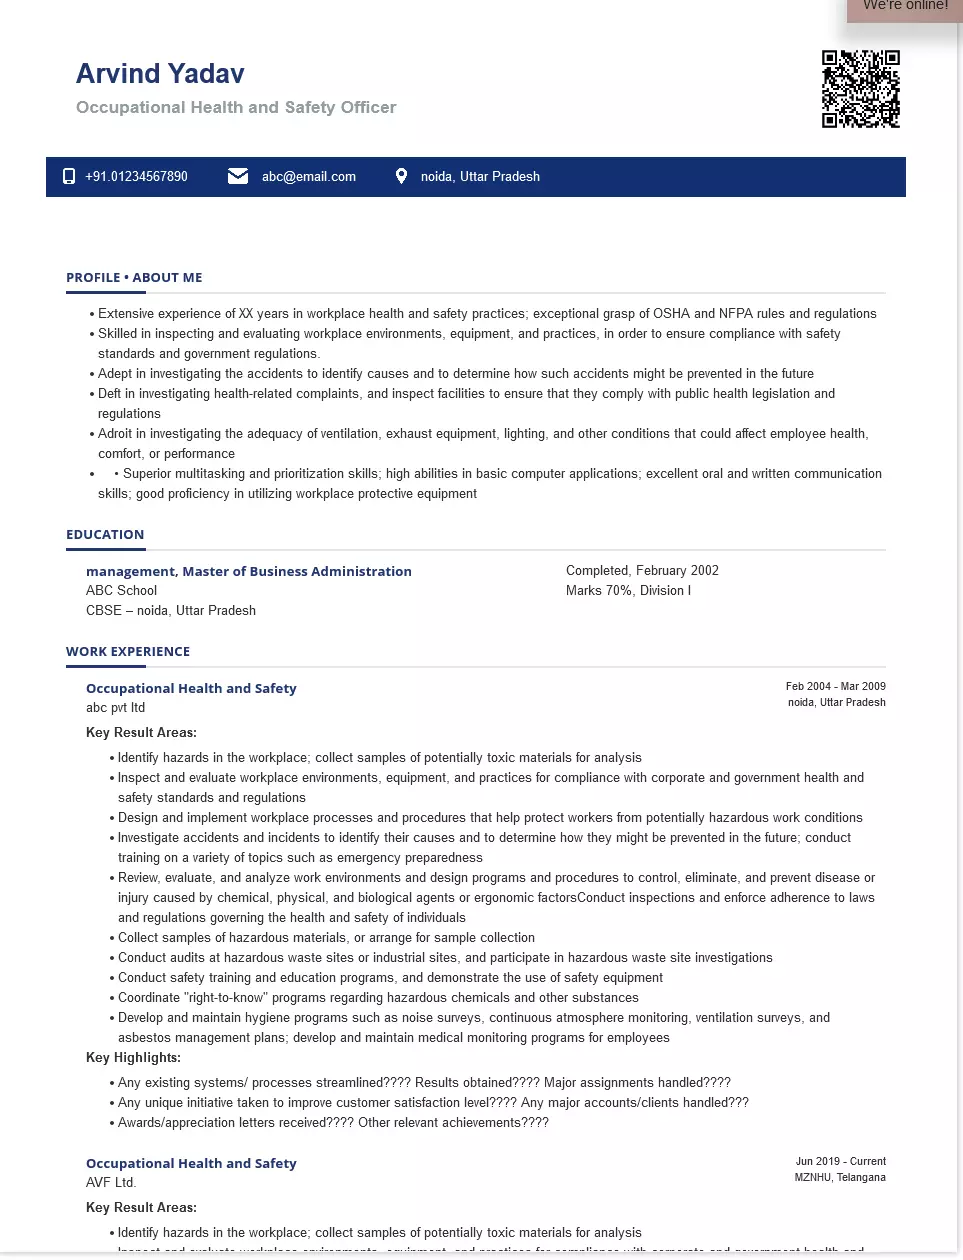 occupational health and safety resume samples